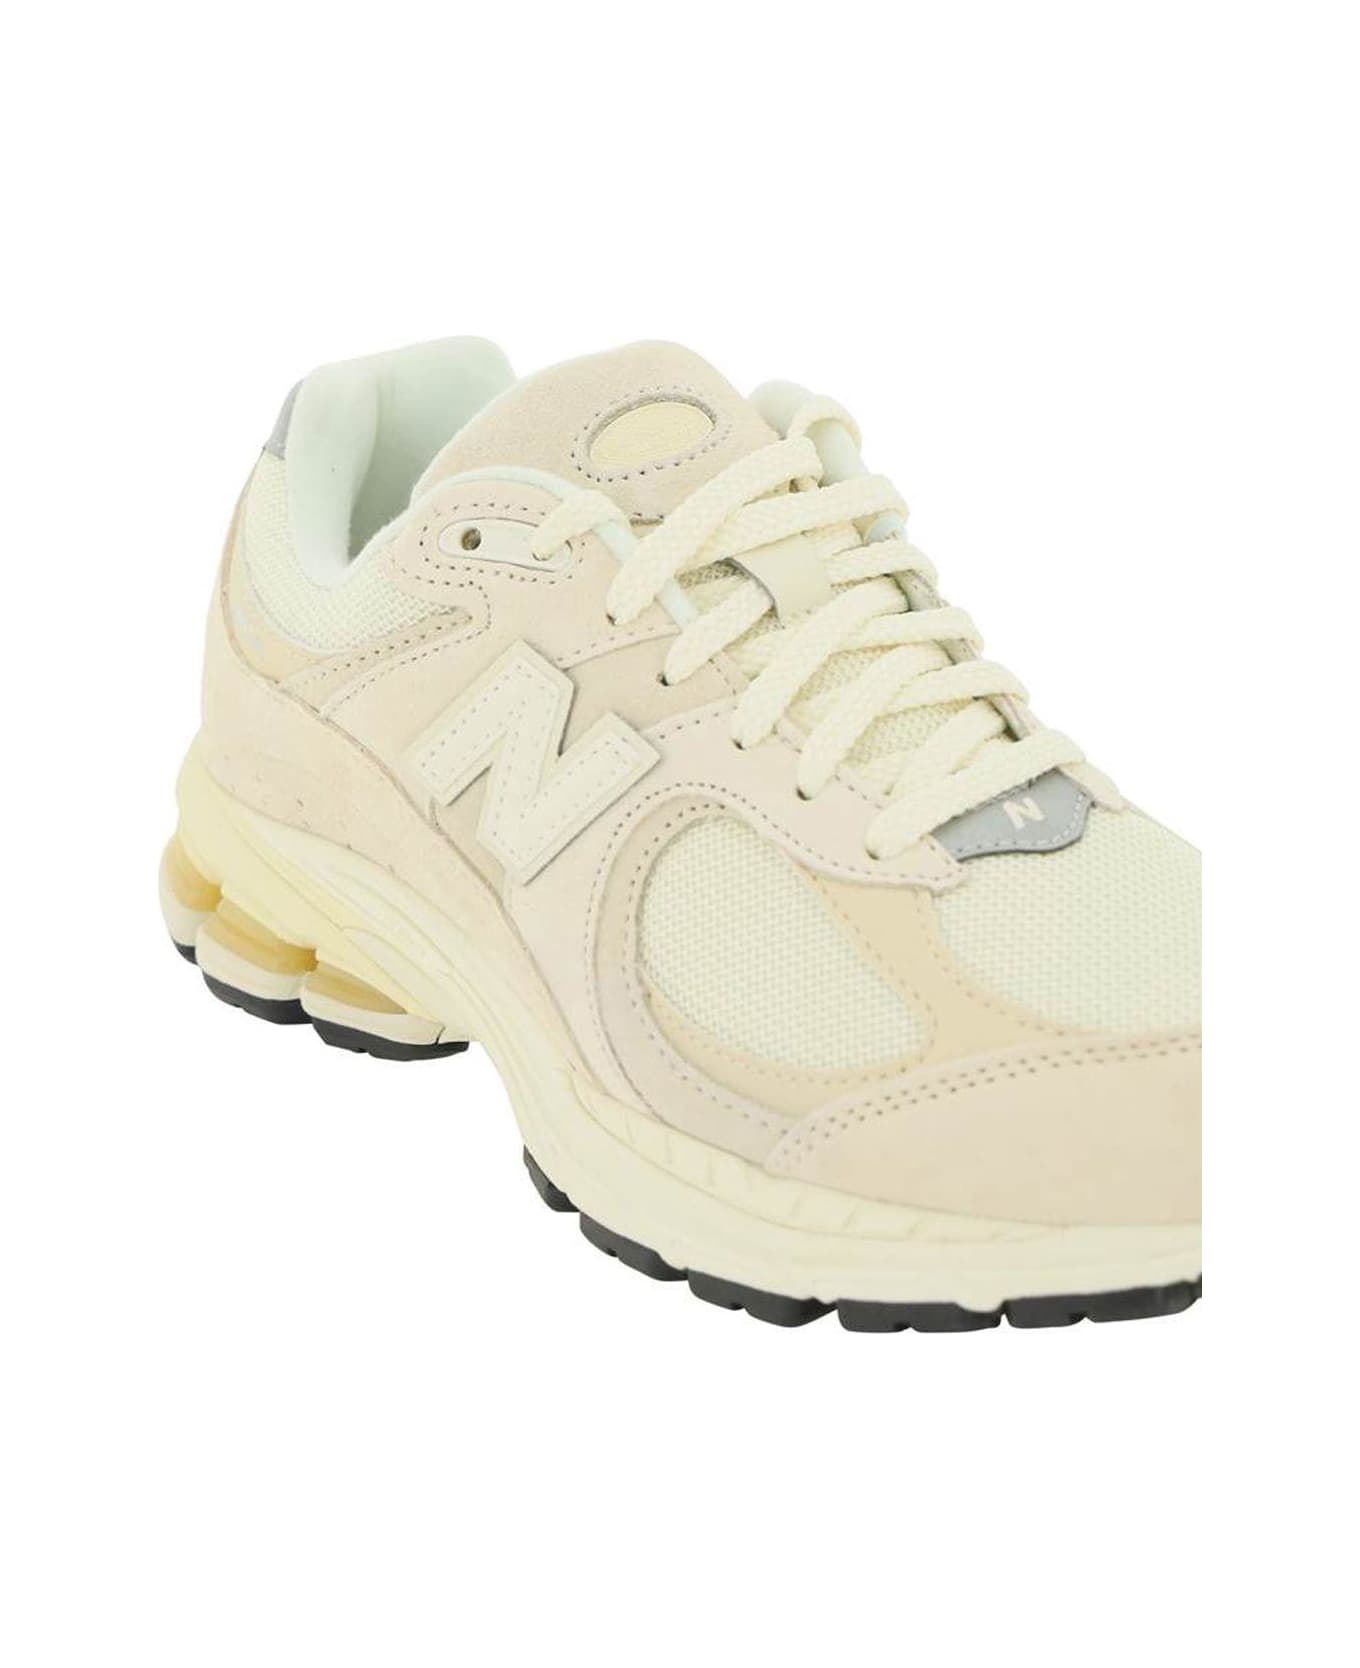 New Balance 2002r Sneakers - White